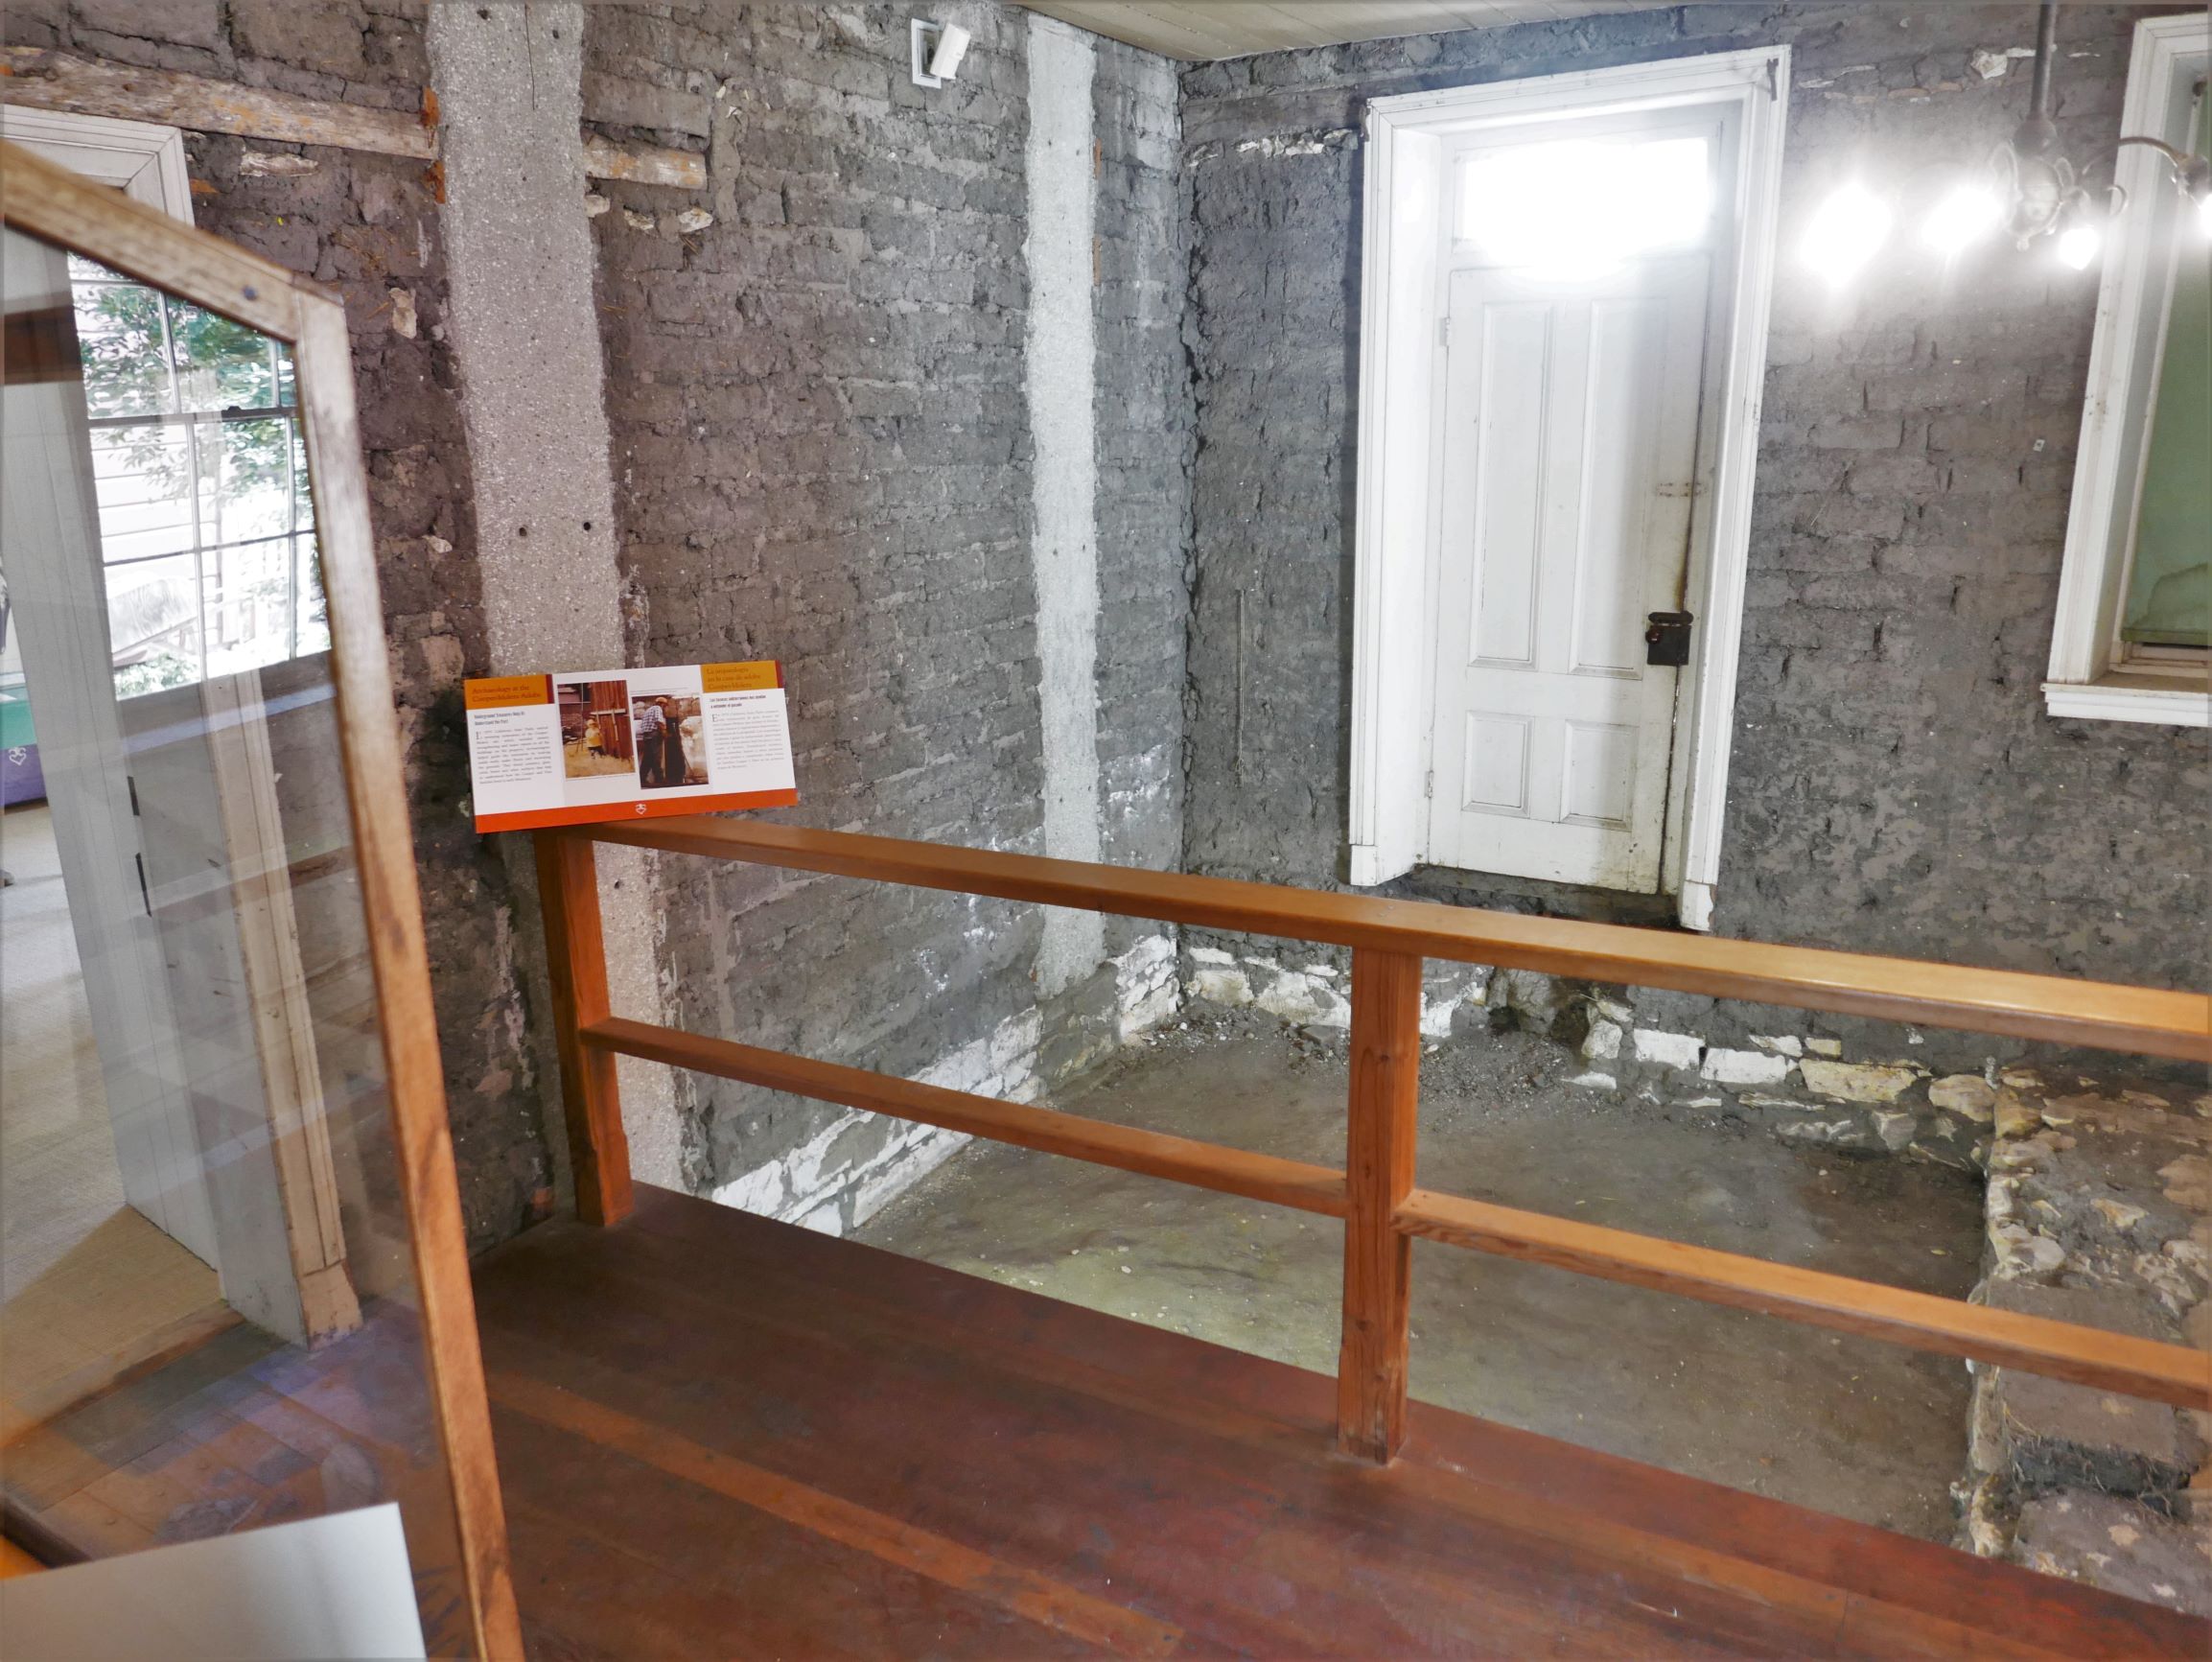 Archaeology Room Exhibit showing the foundation of "Carmel Stone" 2018 © The National Trust for Historic Preservation: